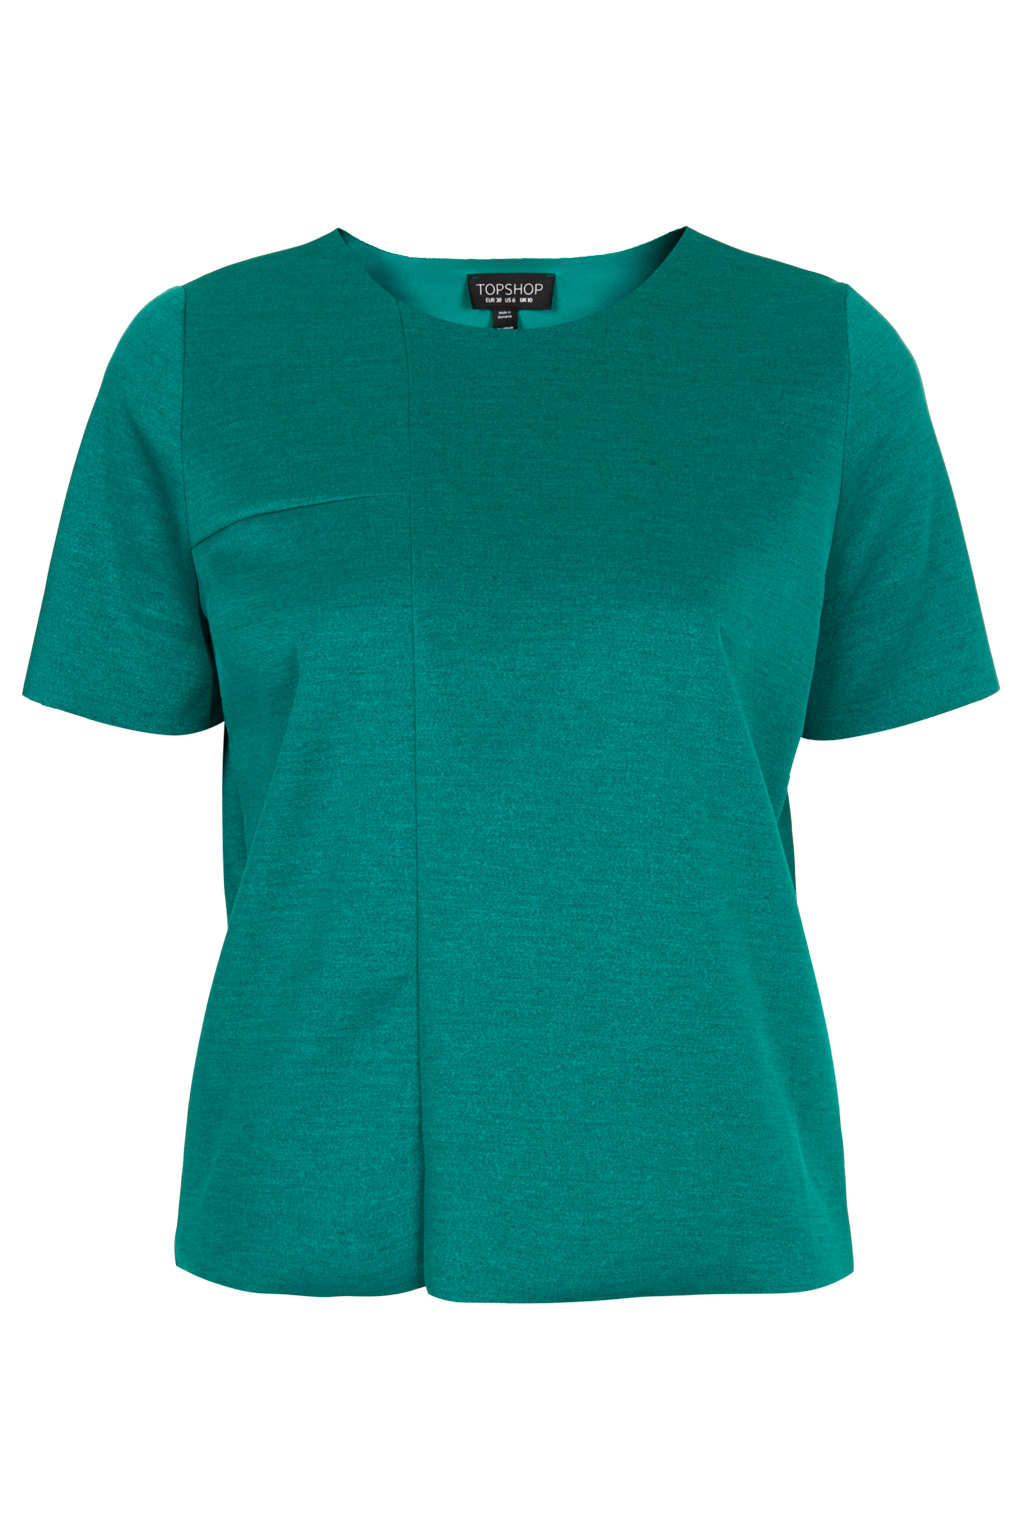 Topshop Boxy T-shirt in Green | Lyst